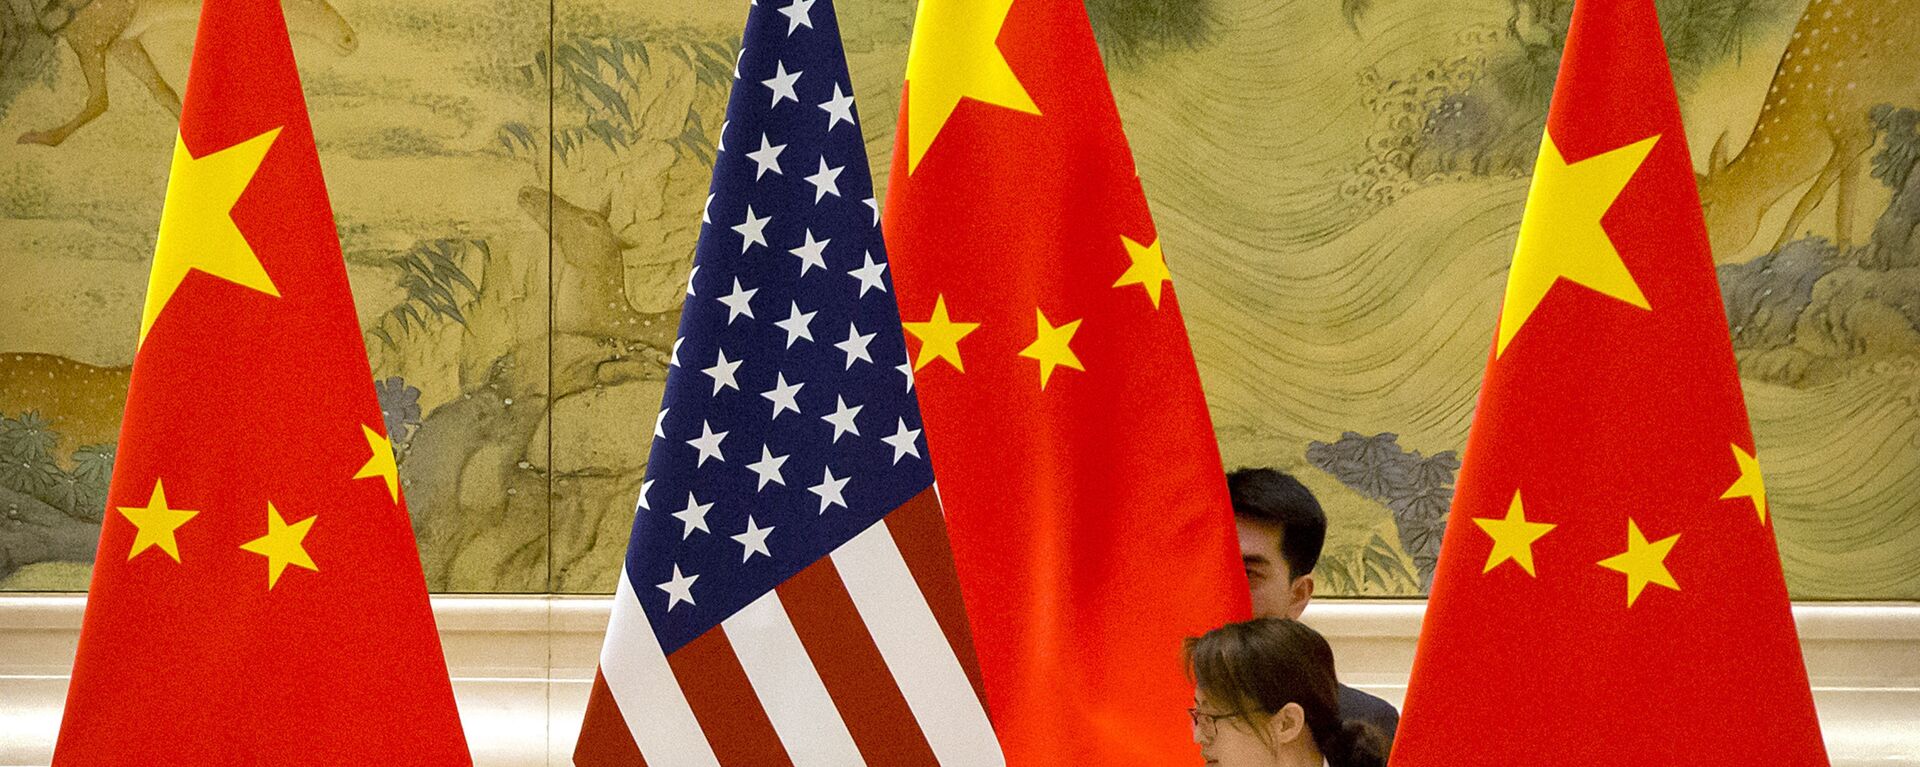 FILE - In this Feb. 14, 2019, file photo, Chinese staffers adjust U.S. and Chinese flags before the opening session of trade negotiations between U.S. and Chinese trade representatives at the Diaoyutai State Guesthouse in Beijing. Beijing on Friday, June 28, 2019 - Sputnik International, 1920, 11.10.2021